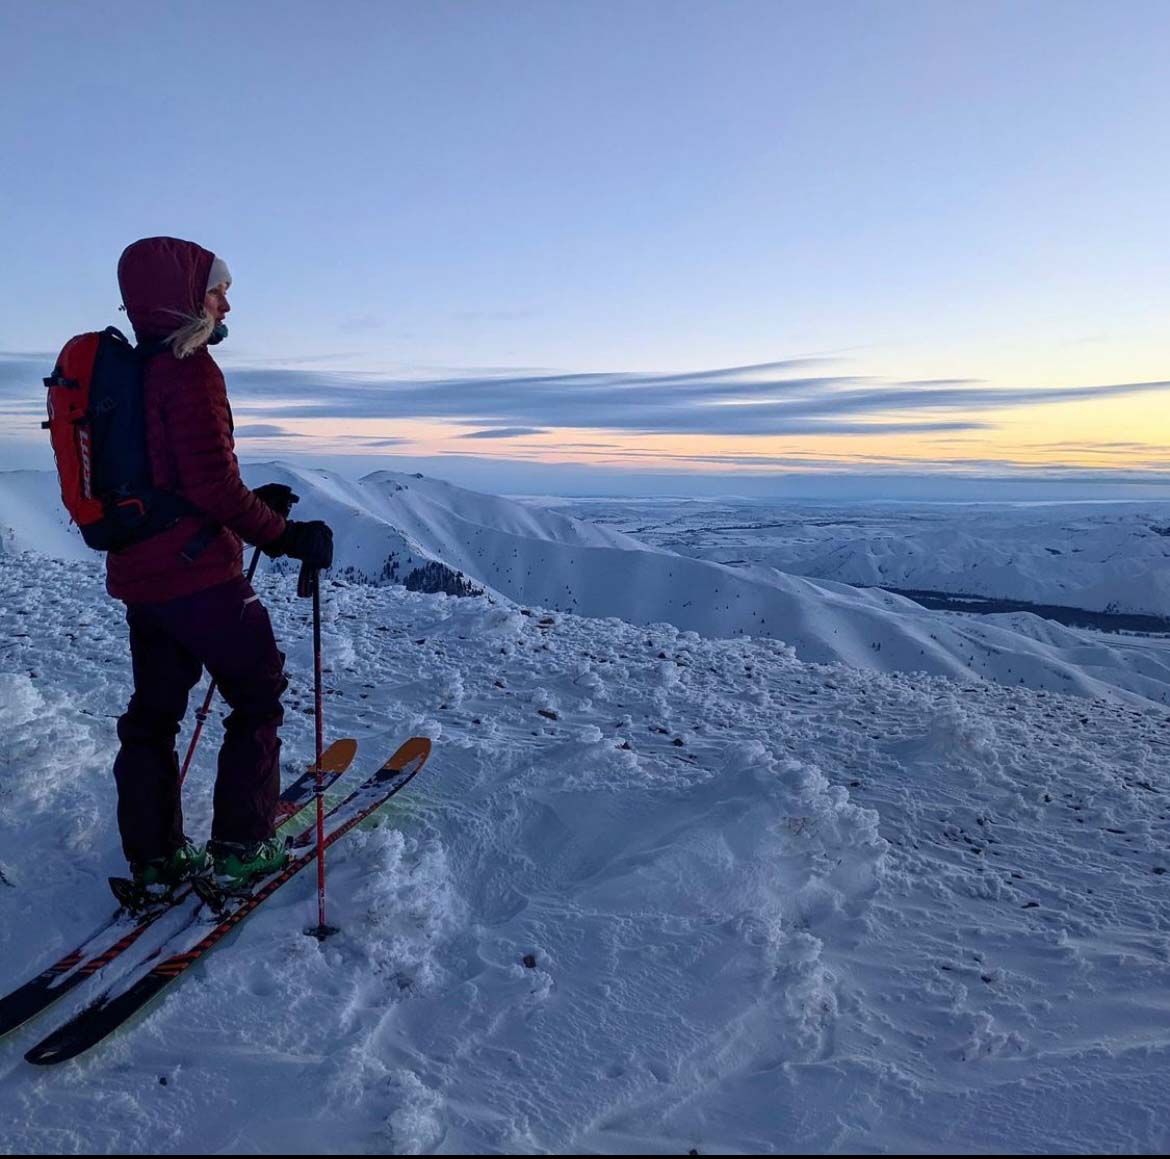 McKenna, standing on skis, gazing from a snowy mountain towards the horizon.